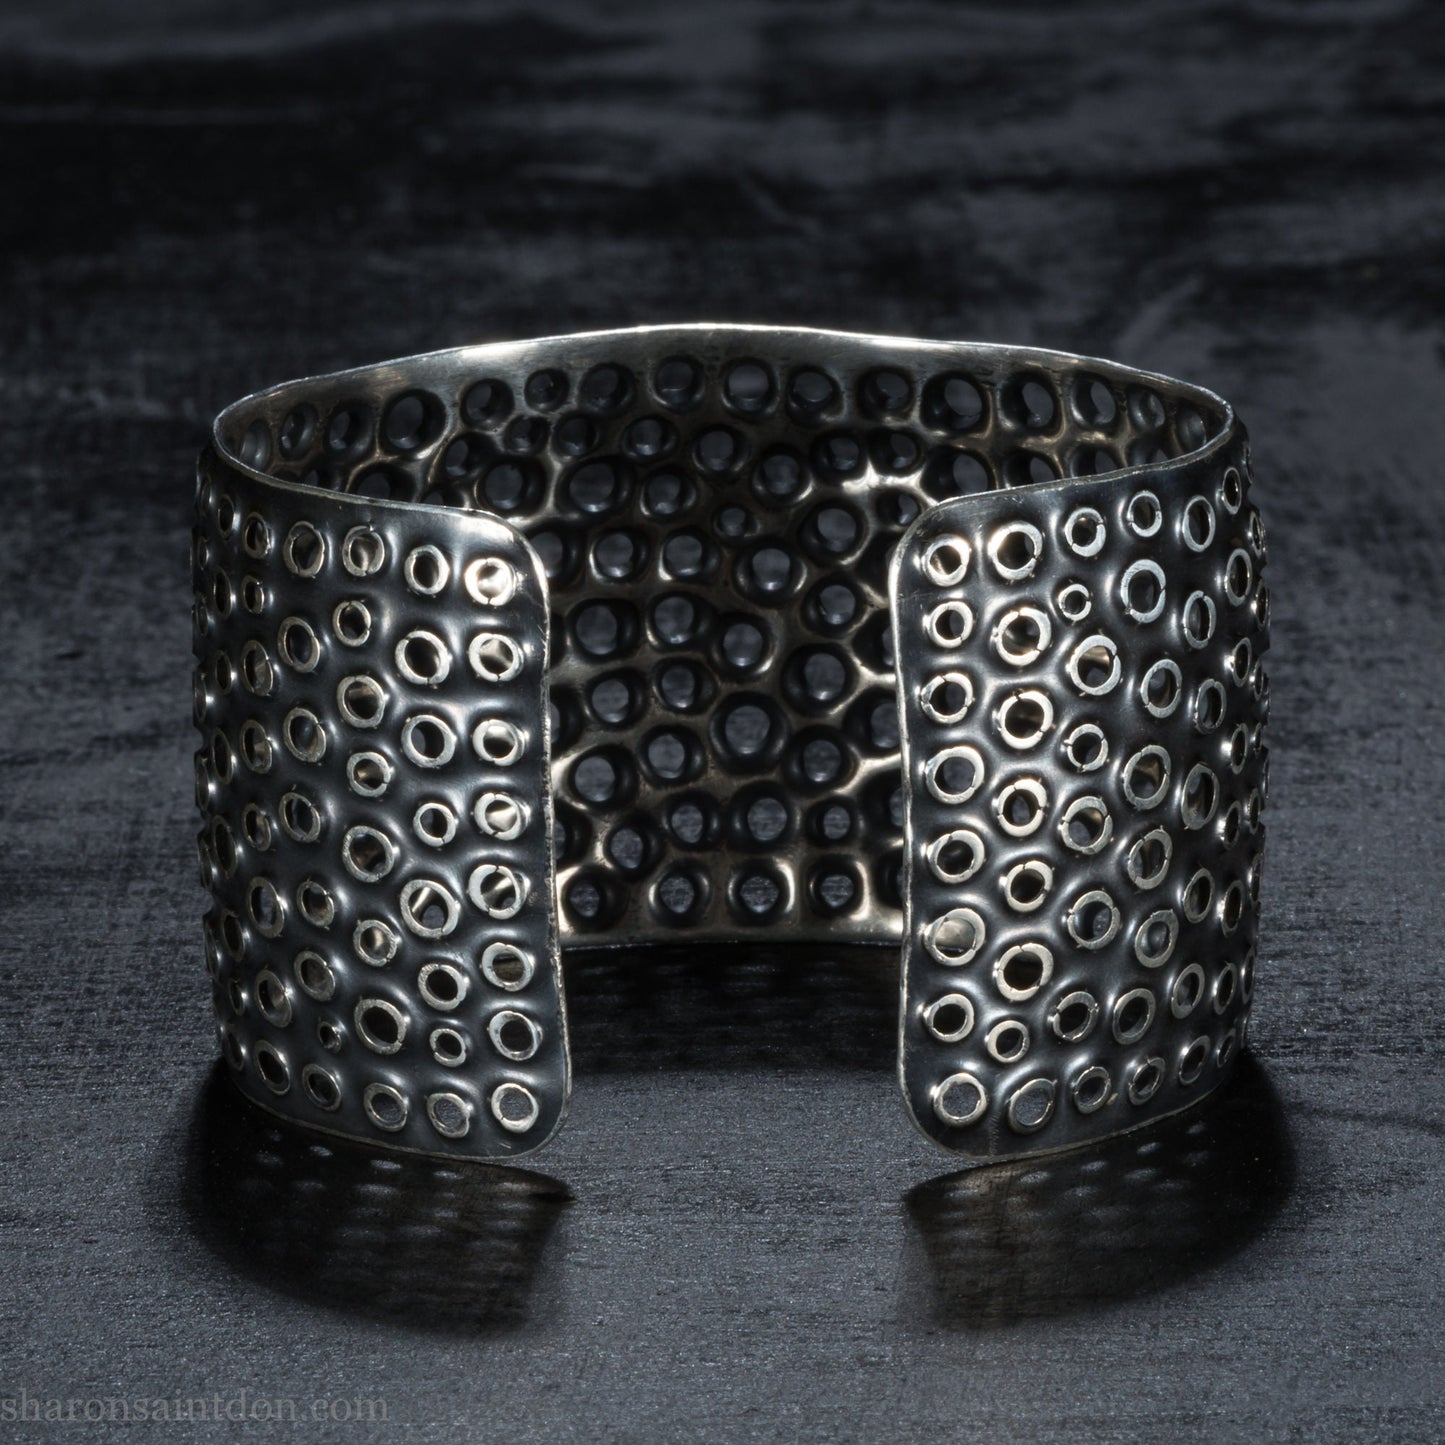 925 sterling silver cuff bracelet handmade in USA. 4cm wide, 40cm x 60cm oval with approximately 28mm flexible opening for wrist. Punched perforated hole texture, oxidized black and rubbed back to show circles as white shiny silver.